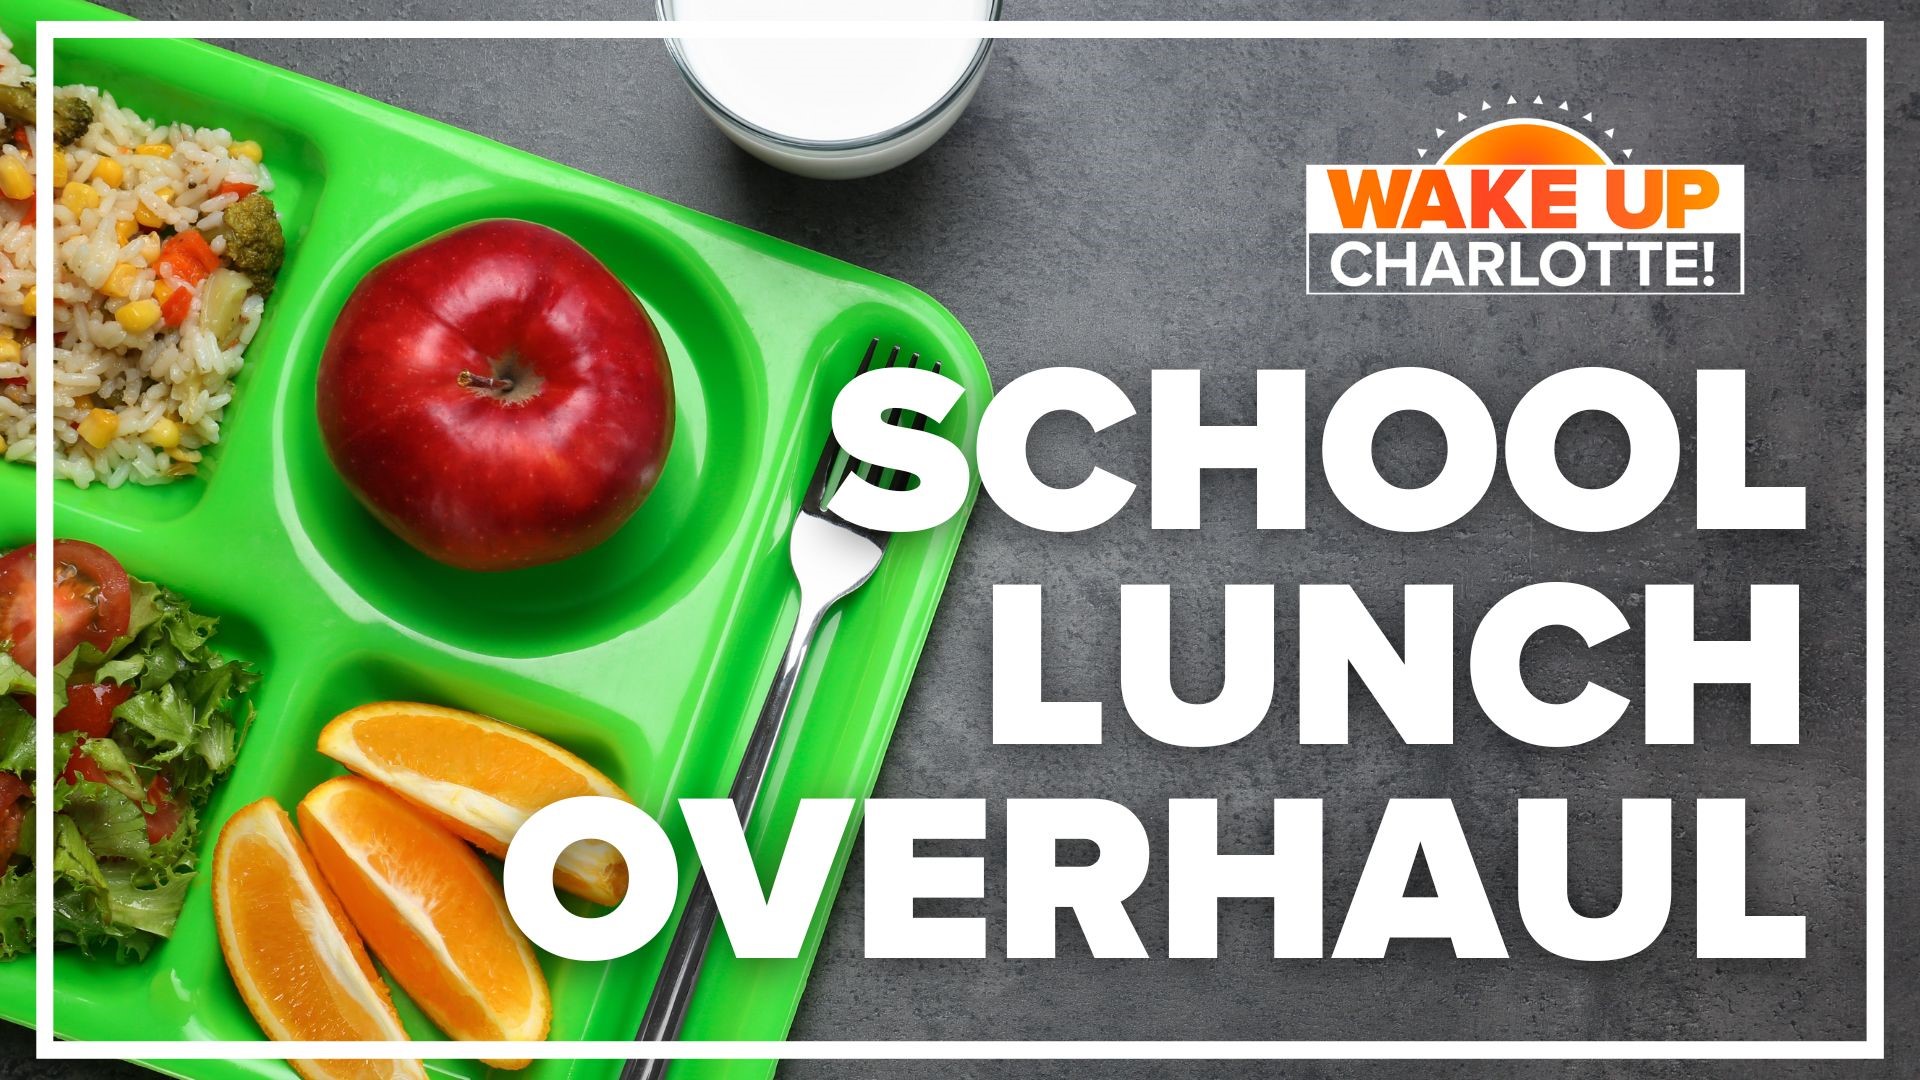 School lunches typically get a bad rap, but a new partnership in North Carolina is looking to change that perception.